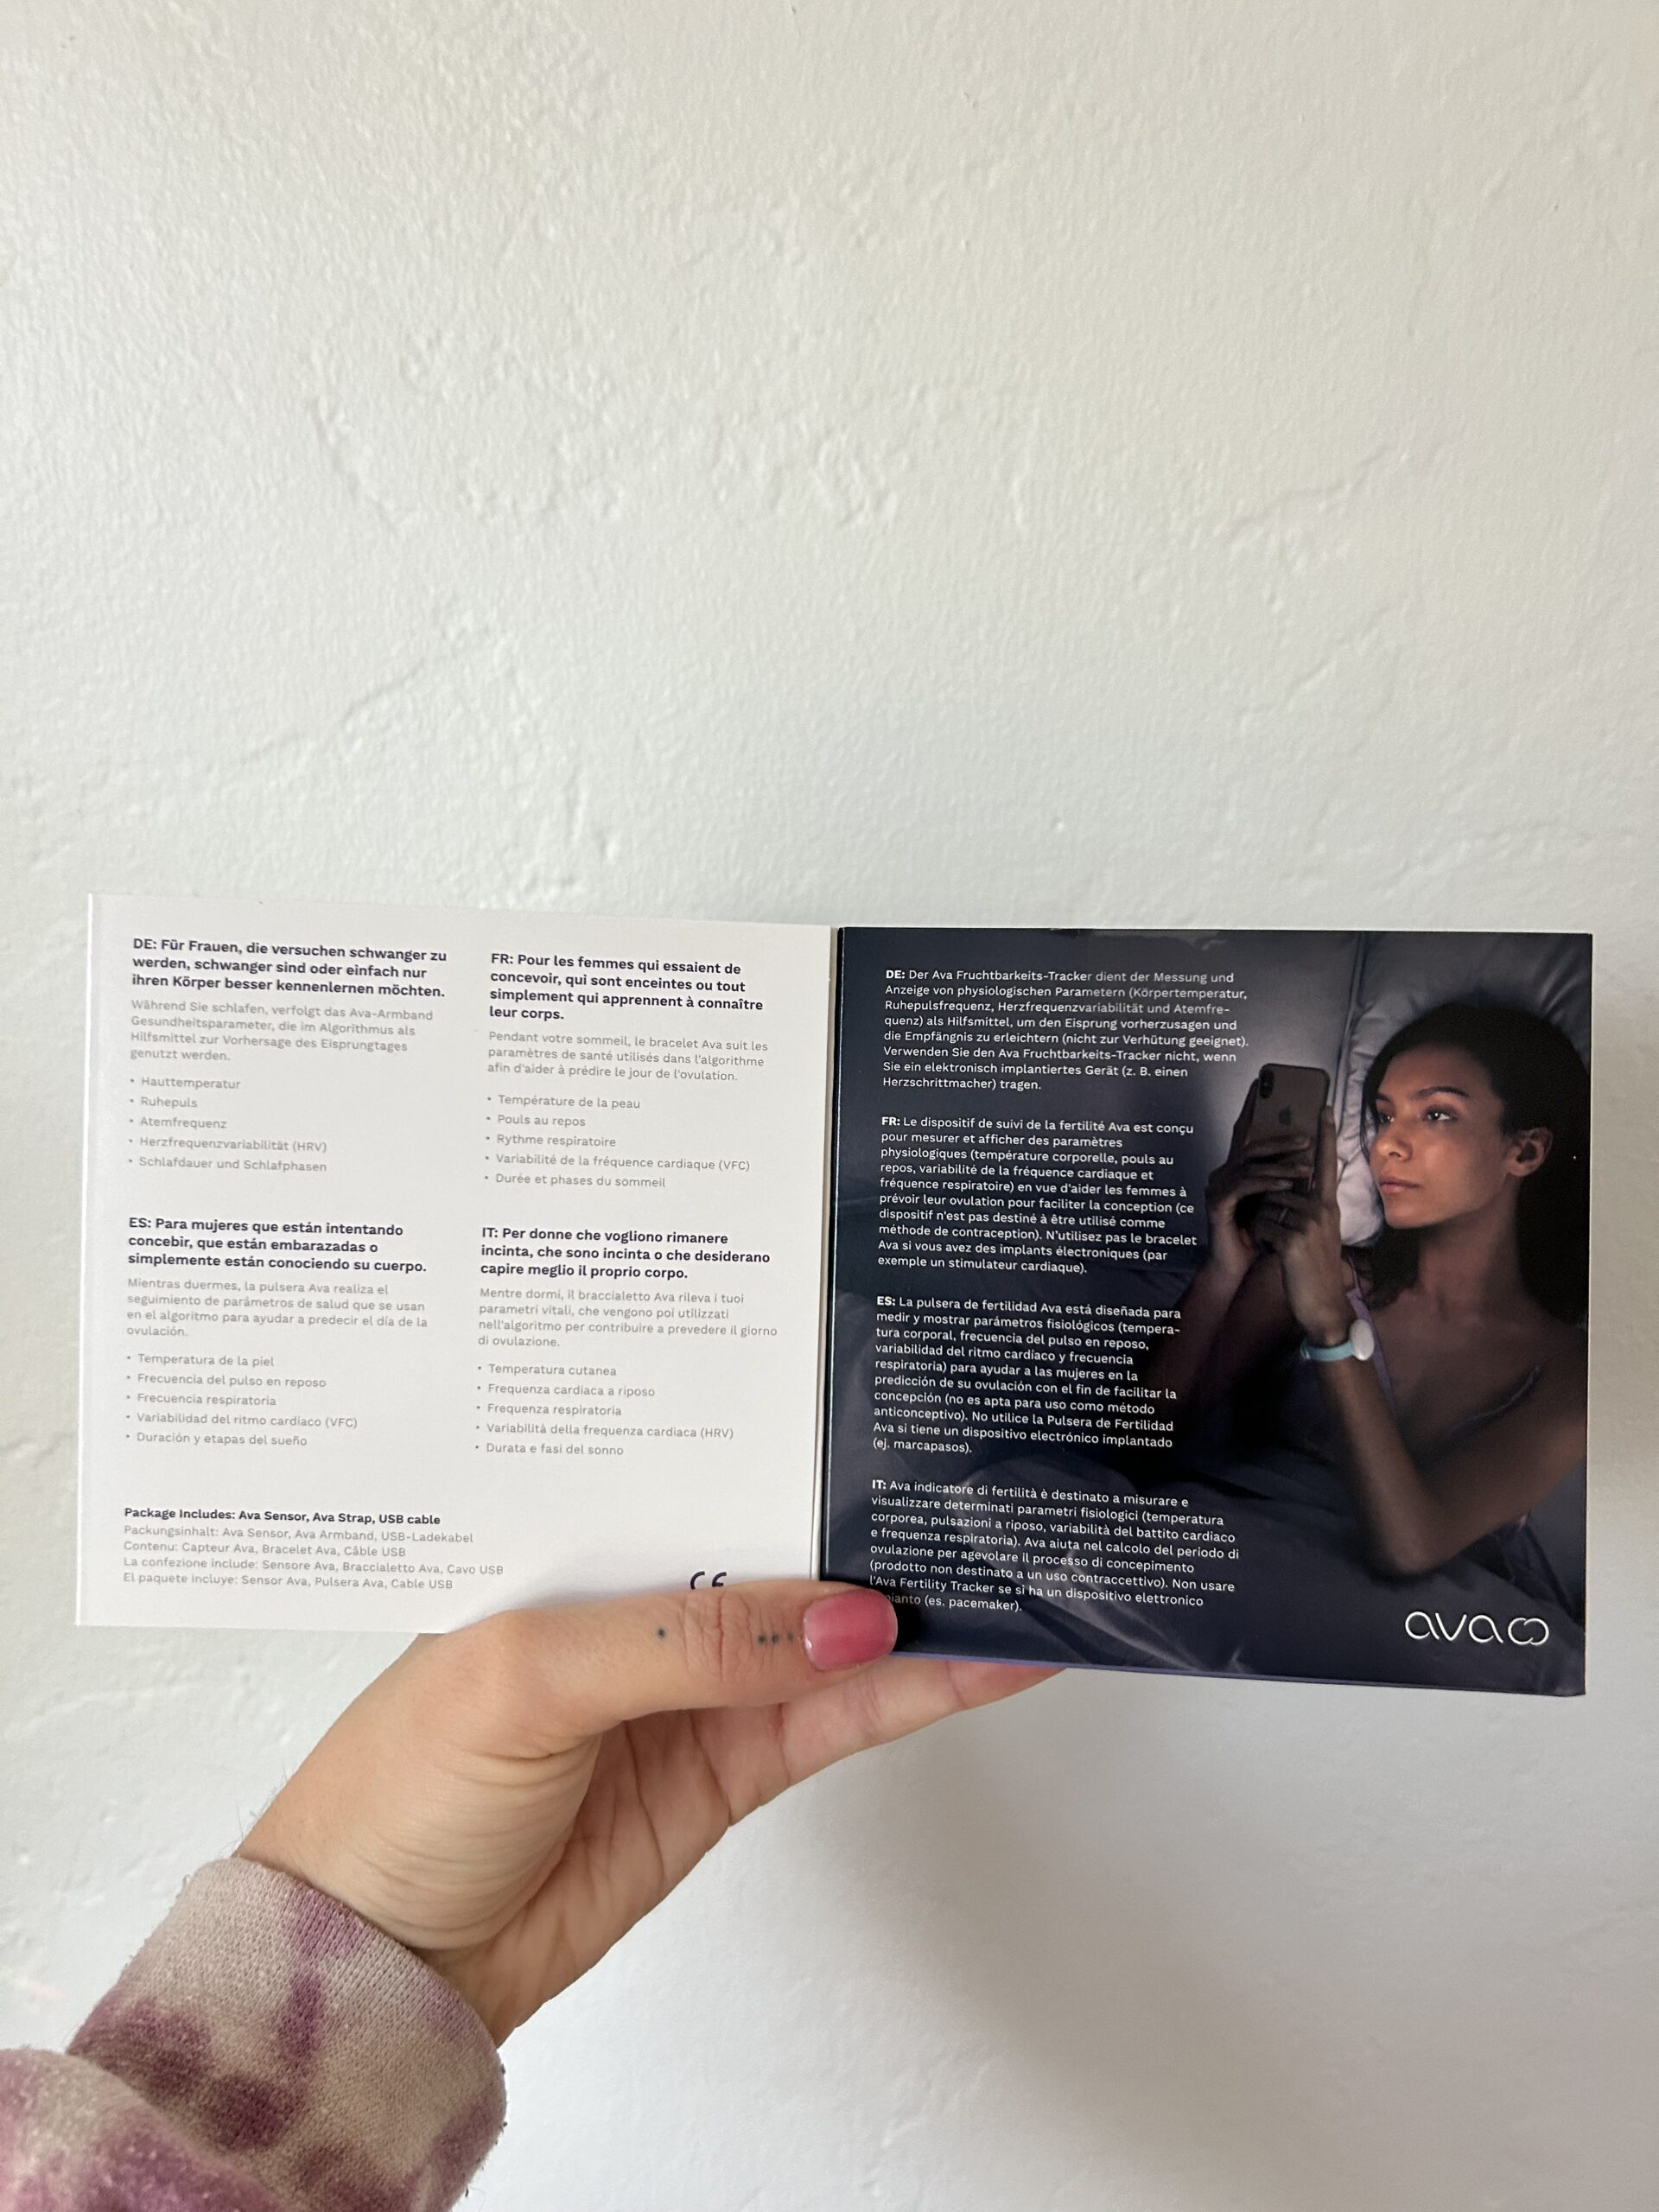 A person holds a brochure with text and an image of a woman using a smartphone.